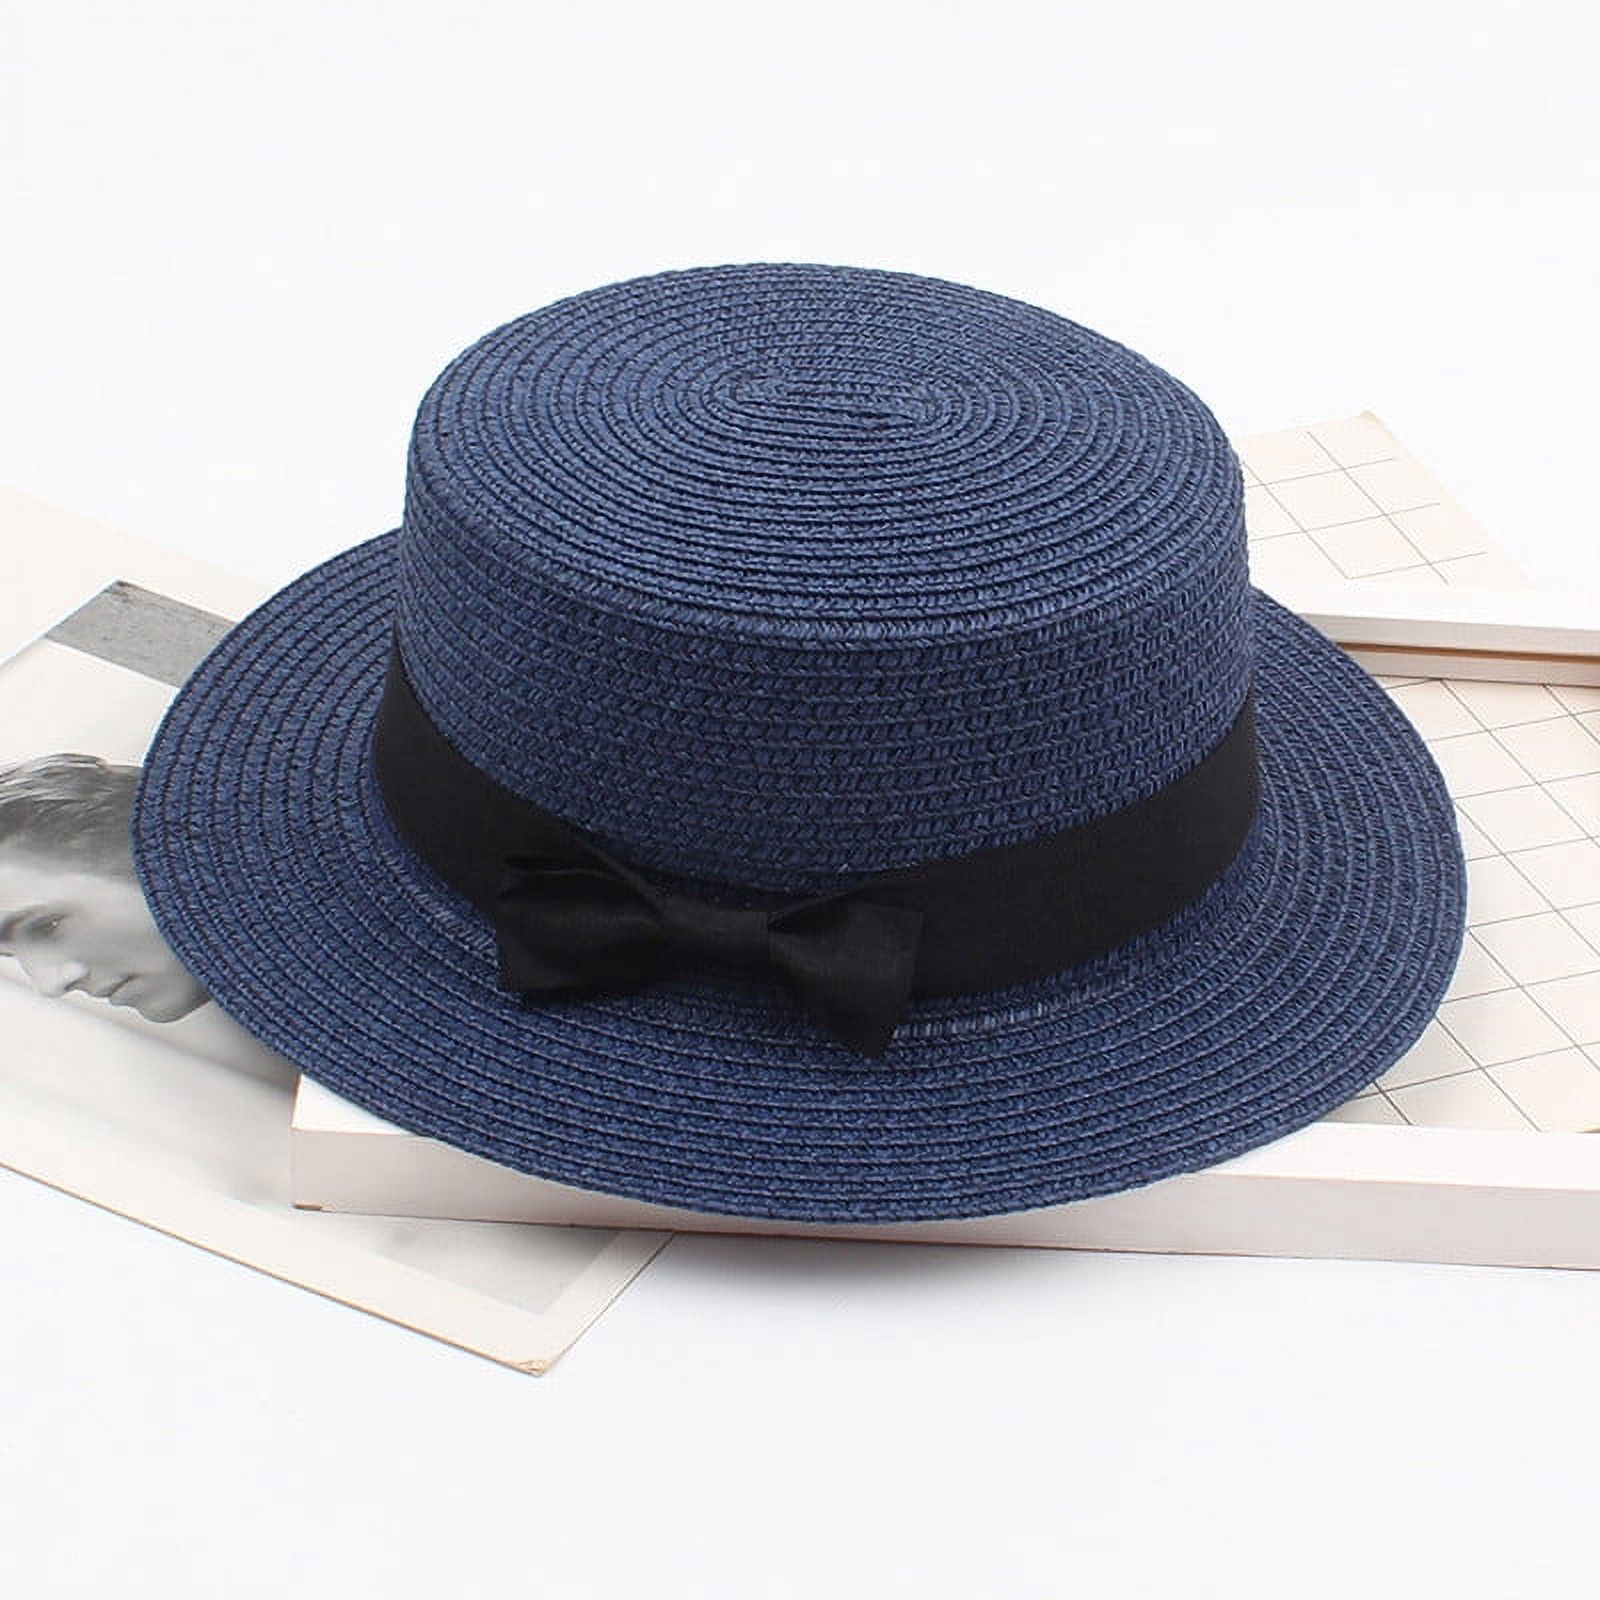 Mchoice Summer Solid Top Hat Sun Hat Straw Beach Hat Fedora Hat for Women on Clearance - image 2 of 2